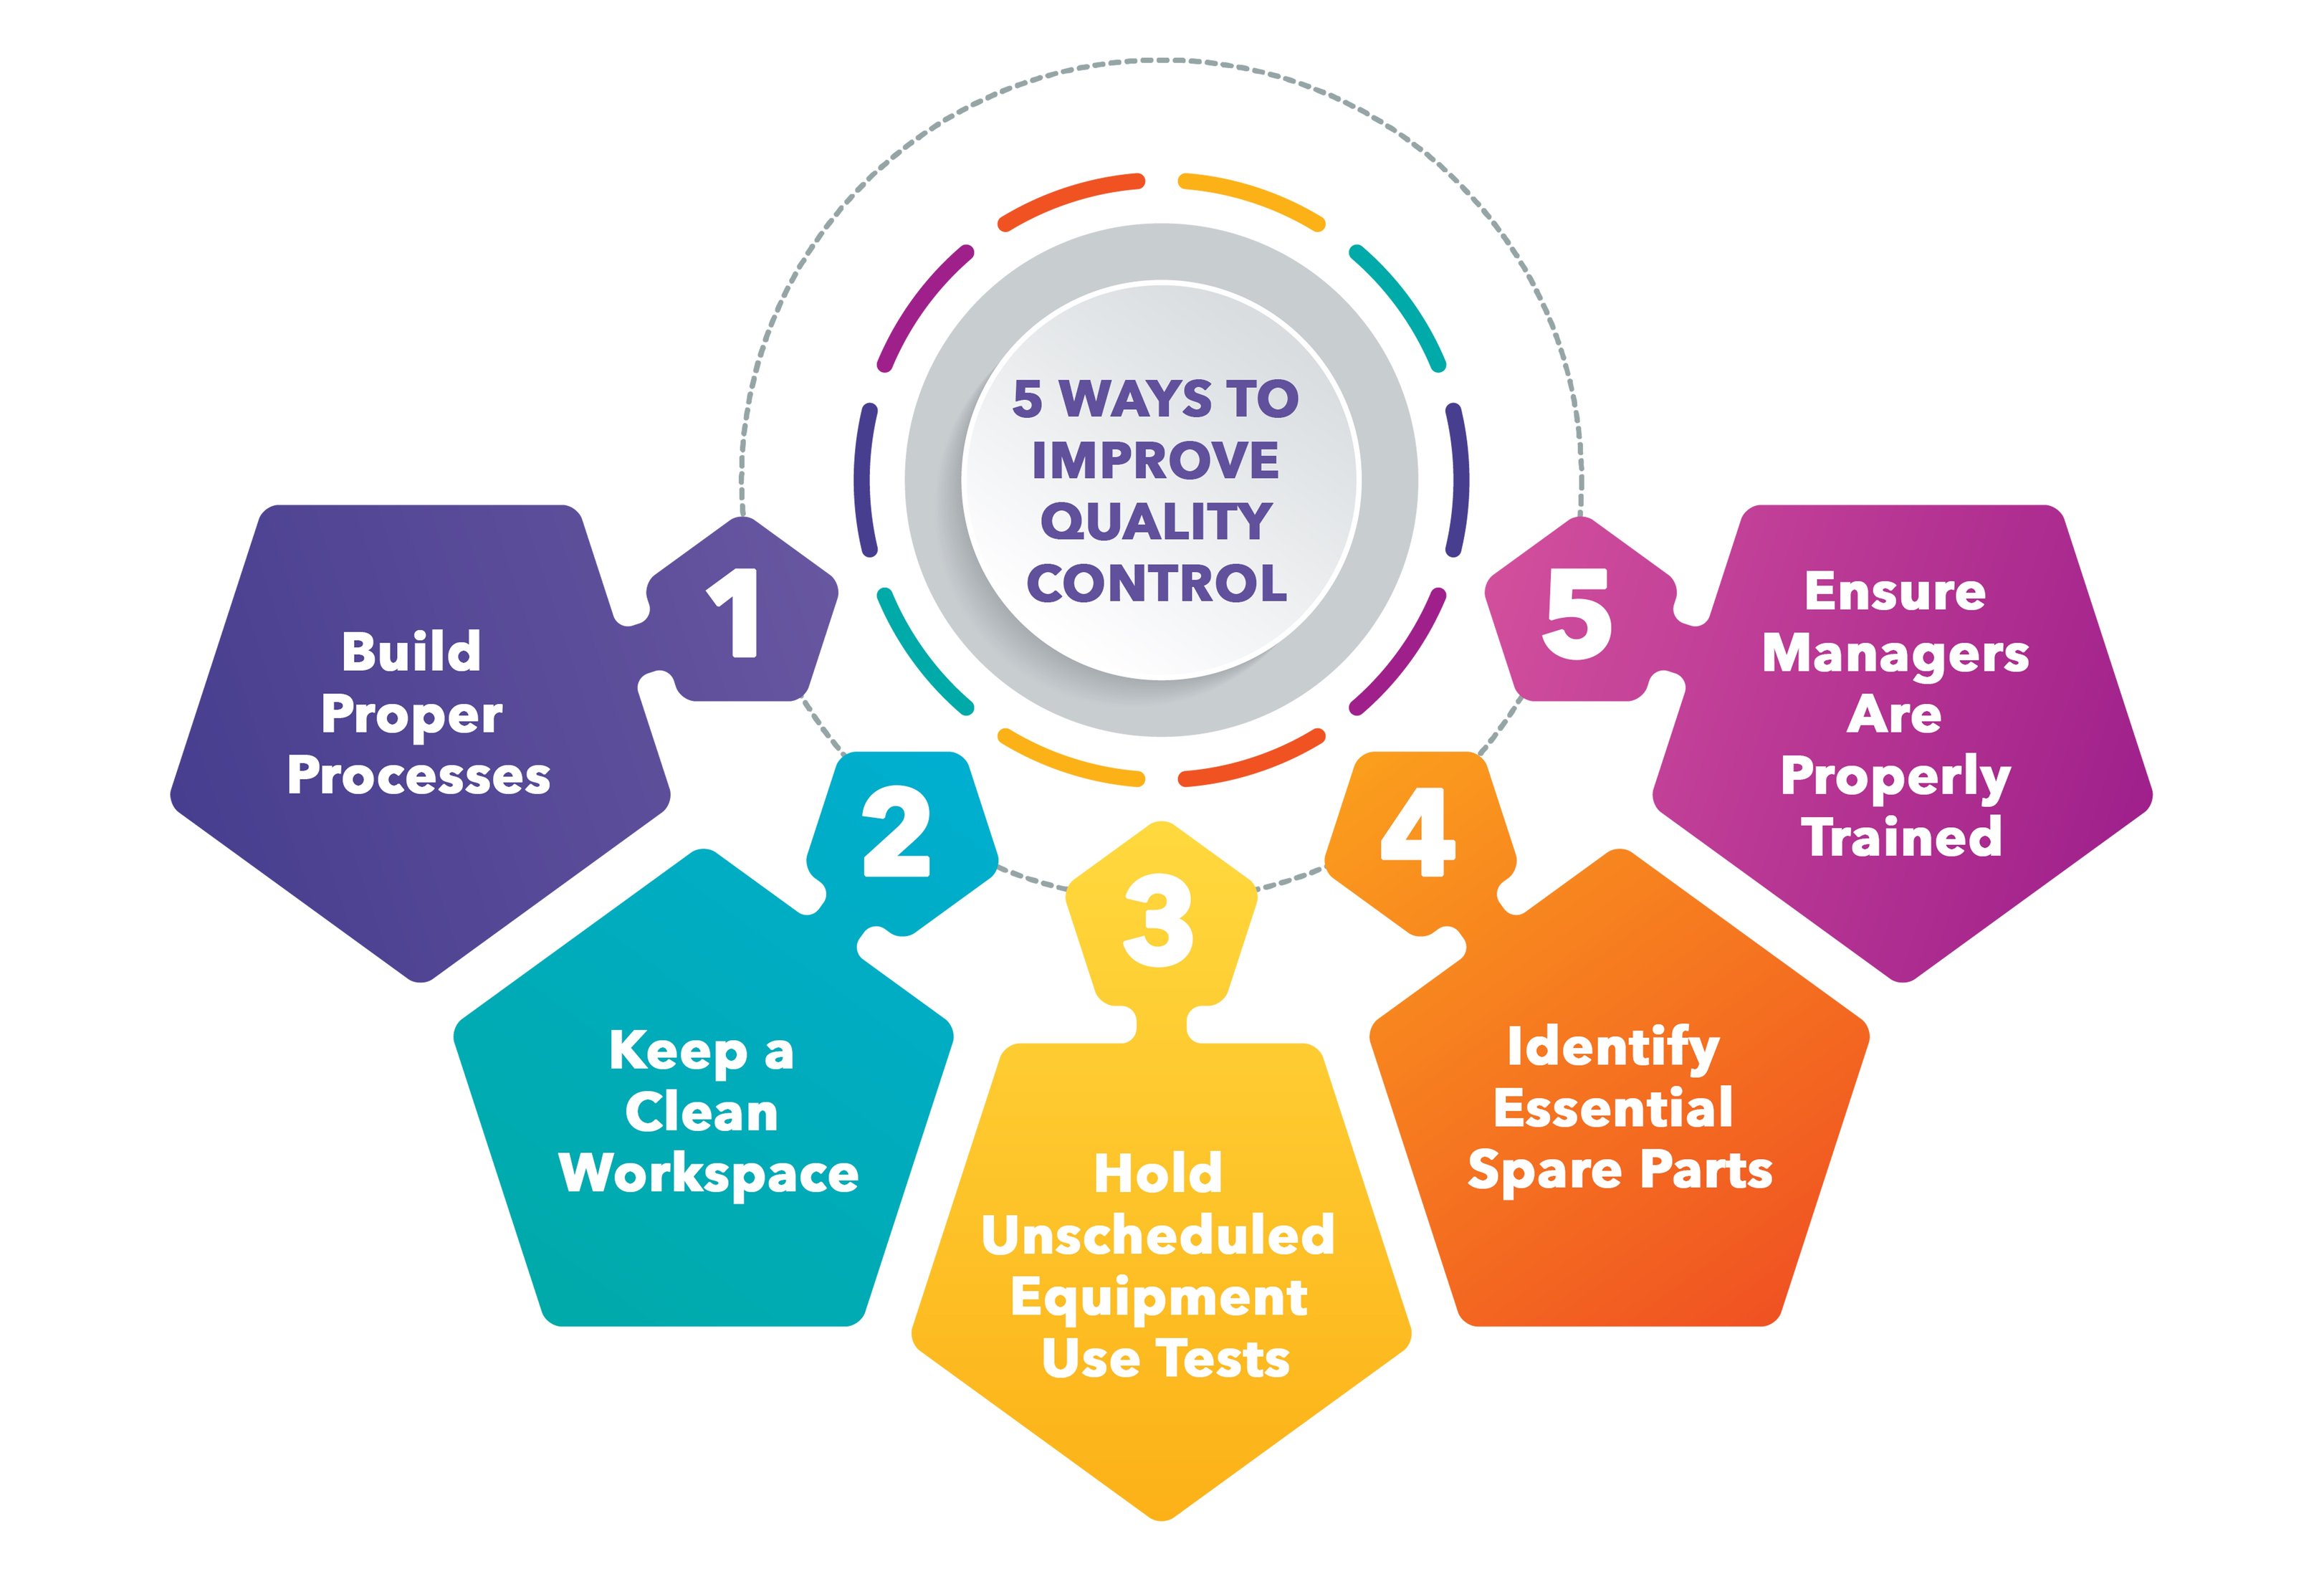  A diagram of a quality control process in a manufacturing plant, with five steps: build proper processes, keep a clean workspace, unscheduled equipment use tests, identify essential spare parts, and ensure managers are properly trained.